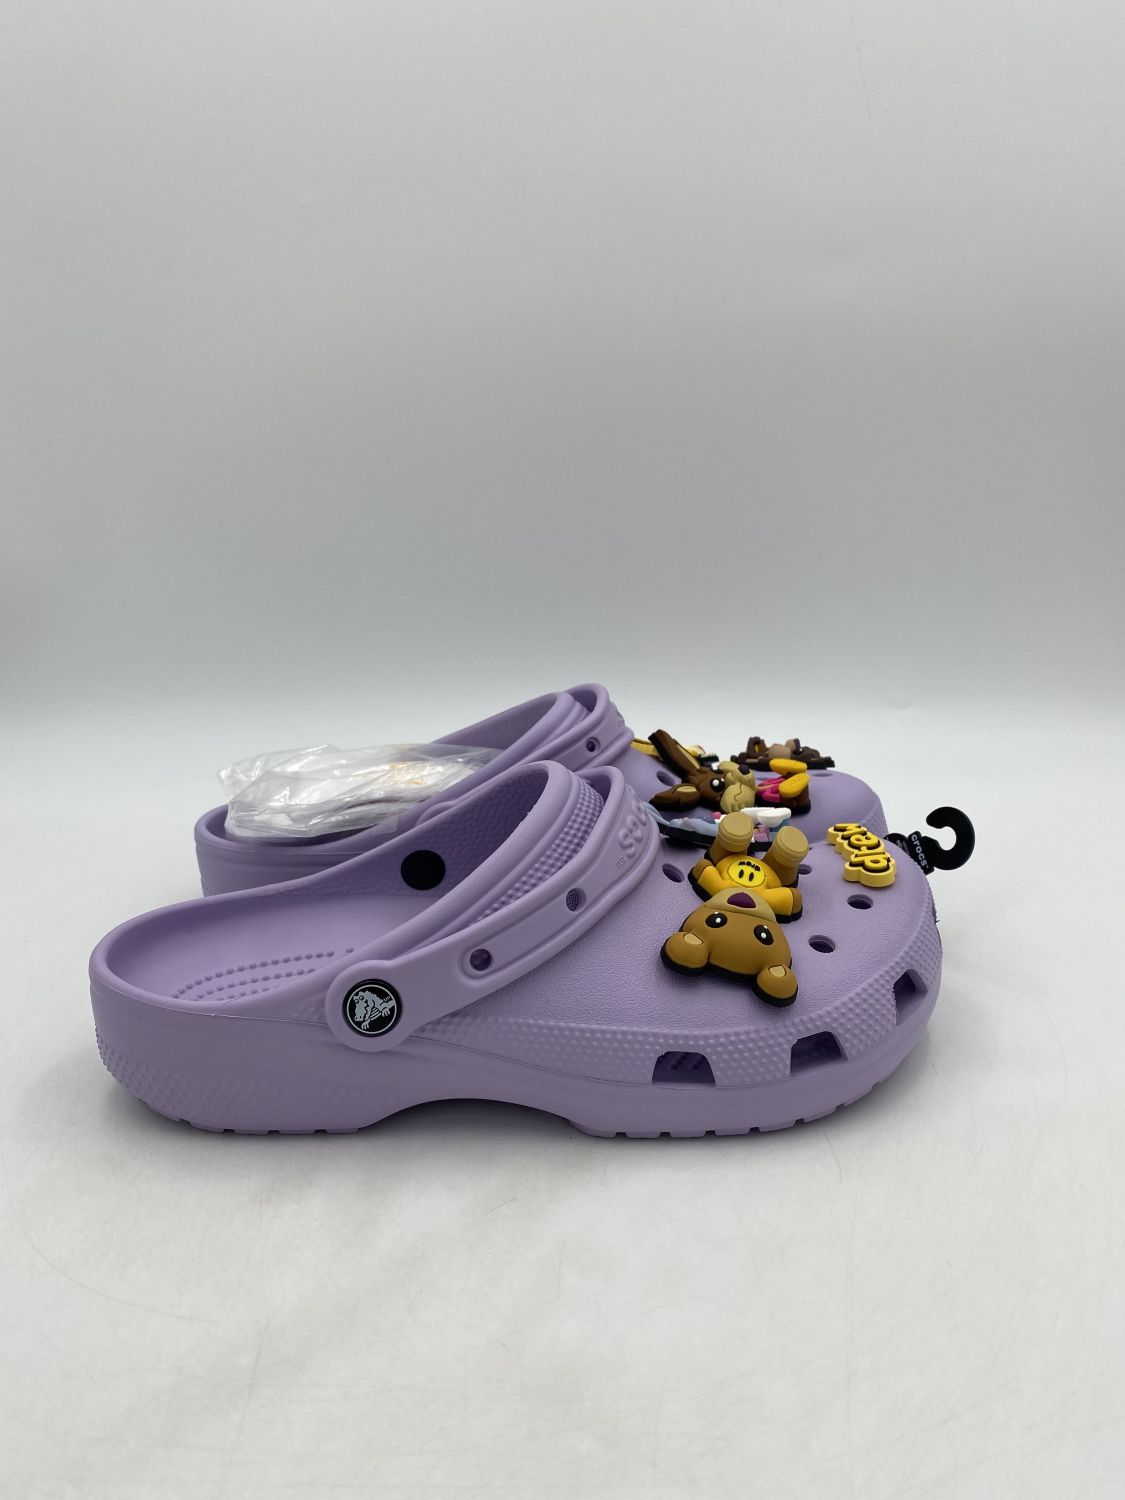 Size 11 Brand New Justin Bieber w/ drew house 2 Lavender Crocs Classic Clog  - clothing & accessories - by owner 